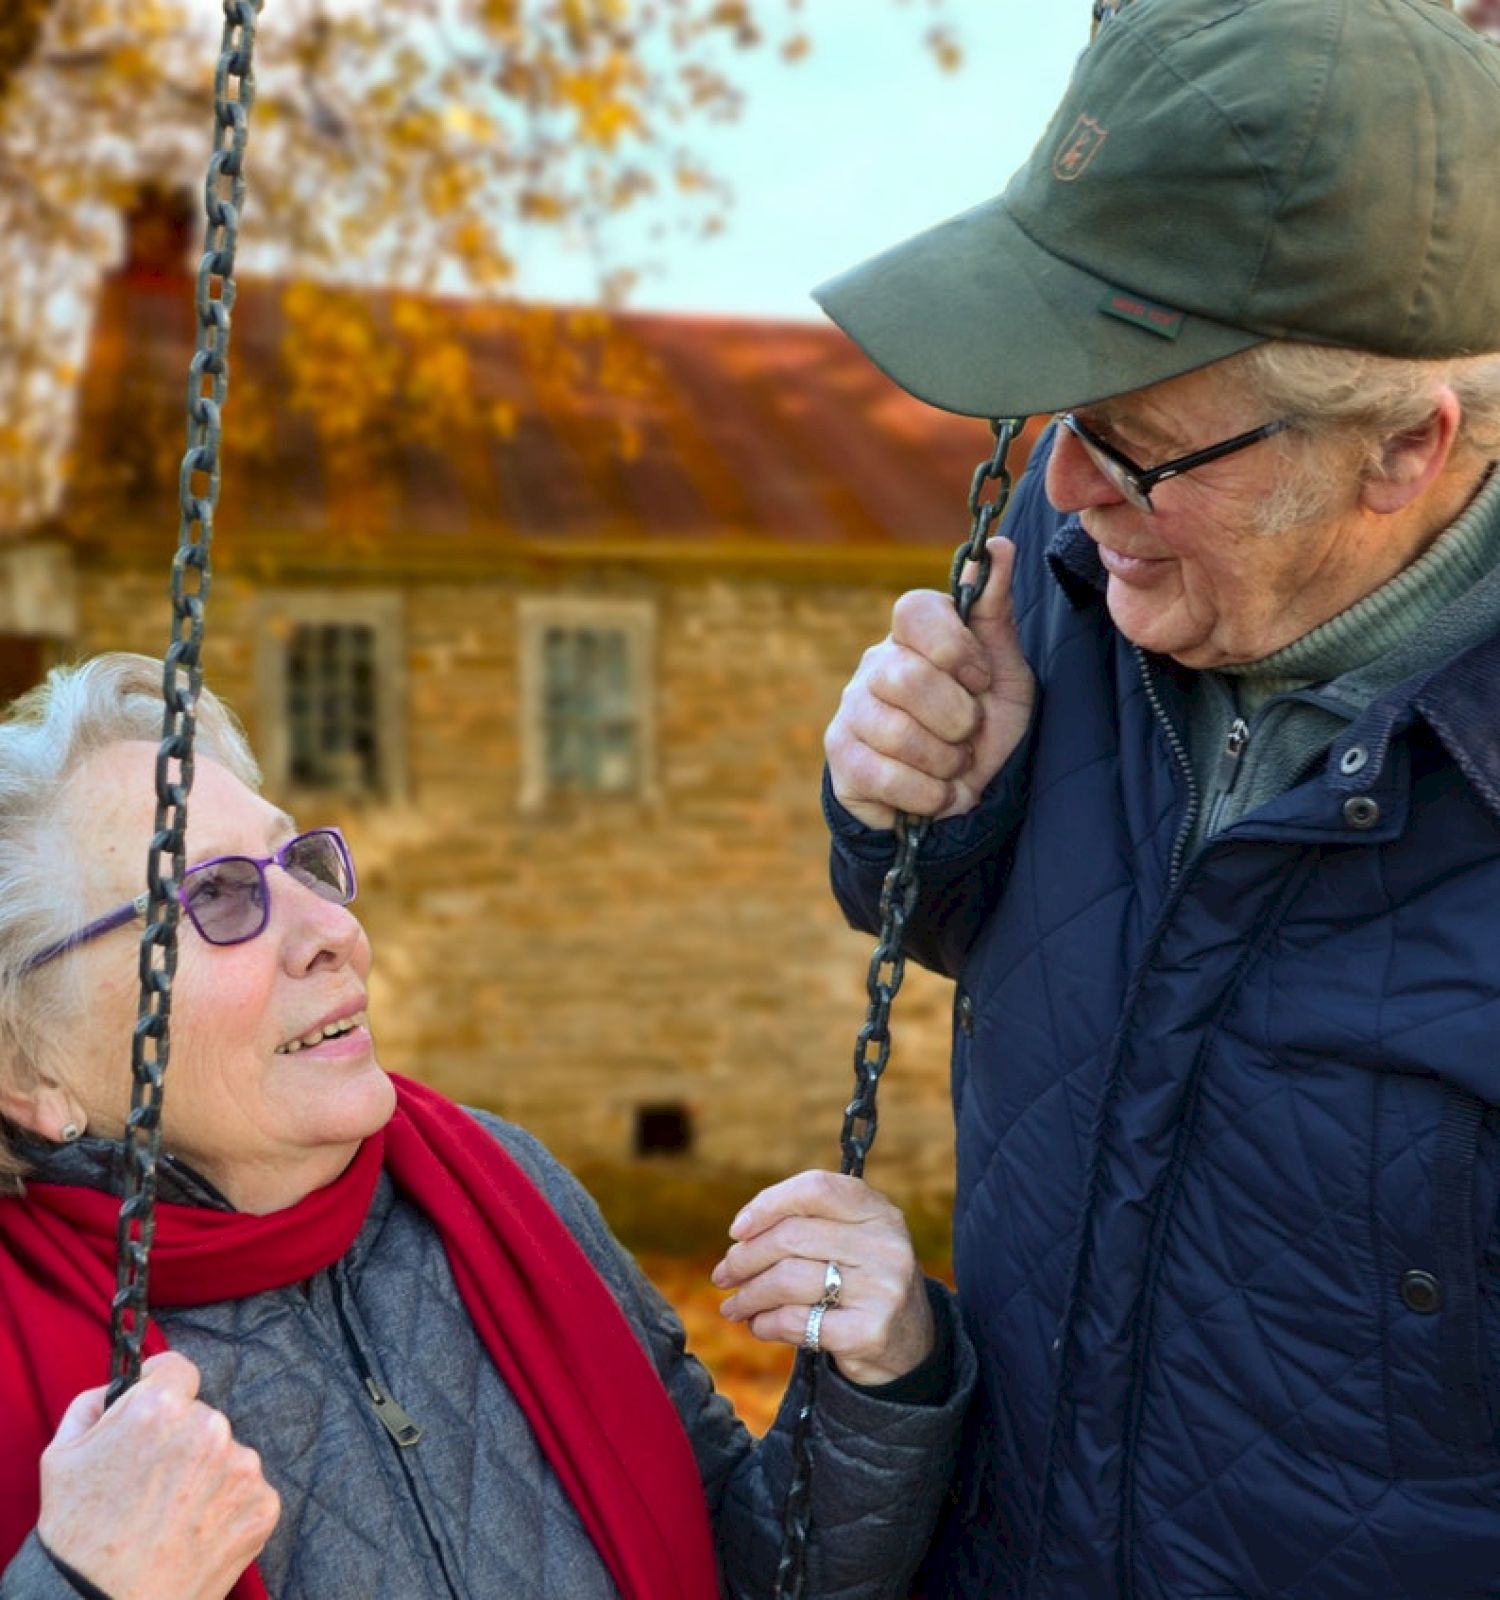 An elderly couple is standing outside in autumn, with the woman on a swing and the man holding its chains, smiling and looking at each other.